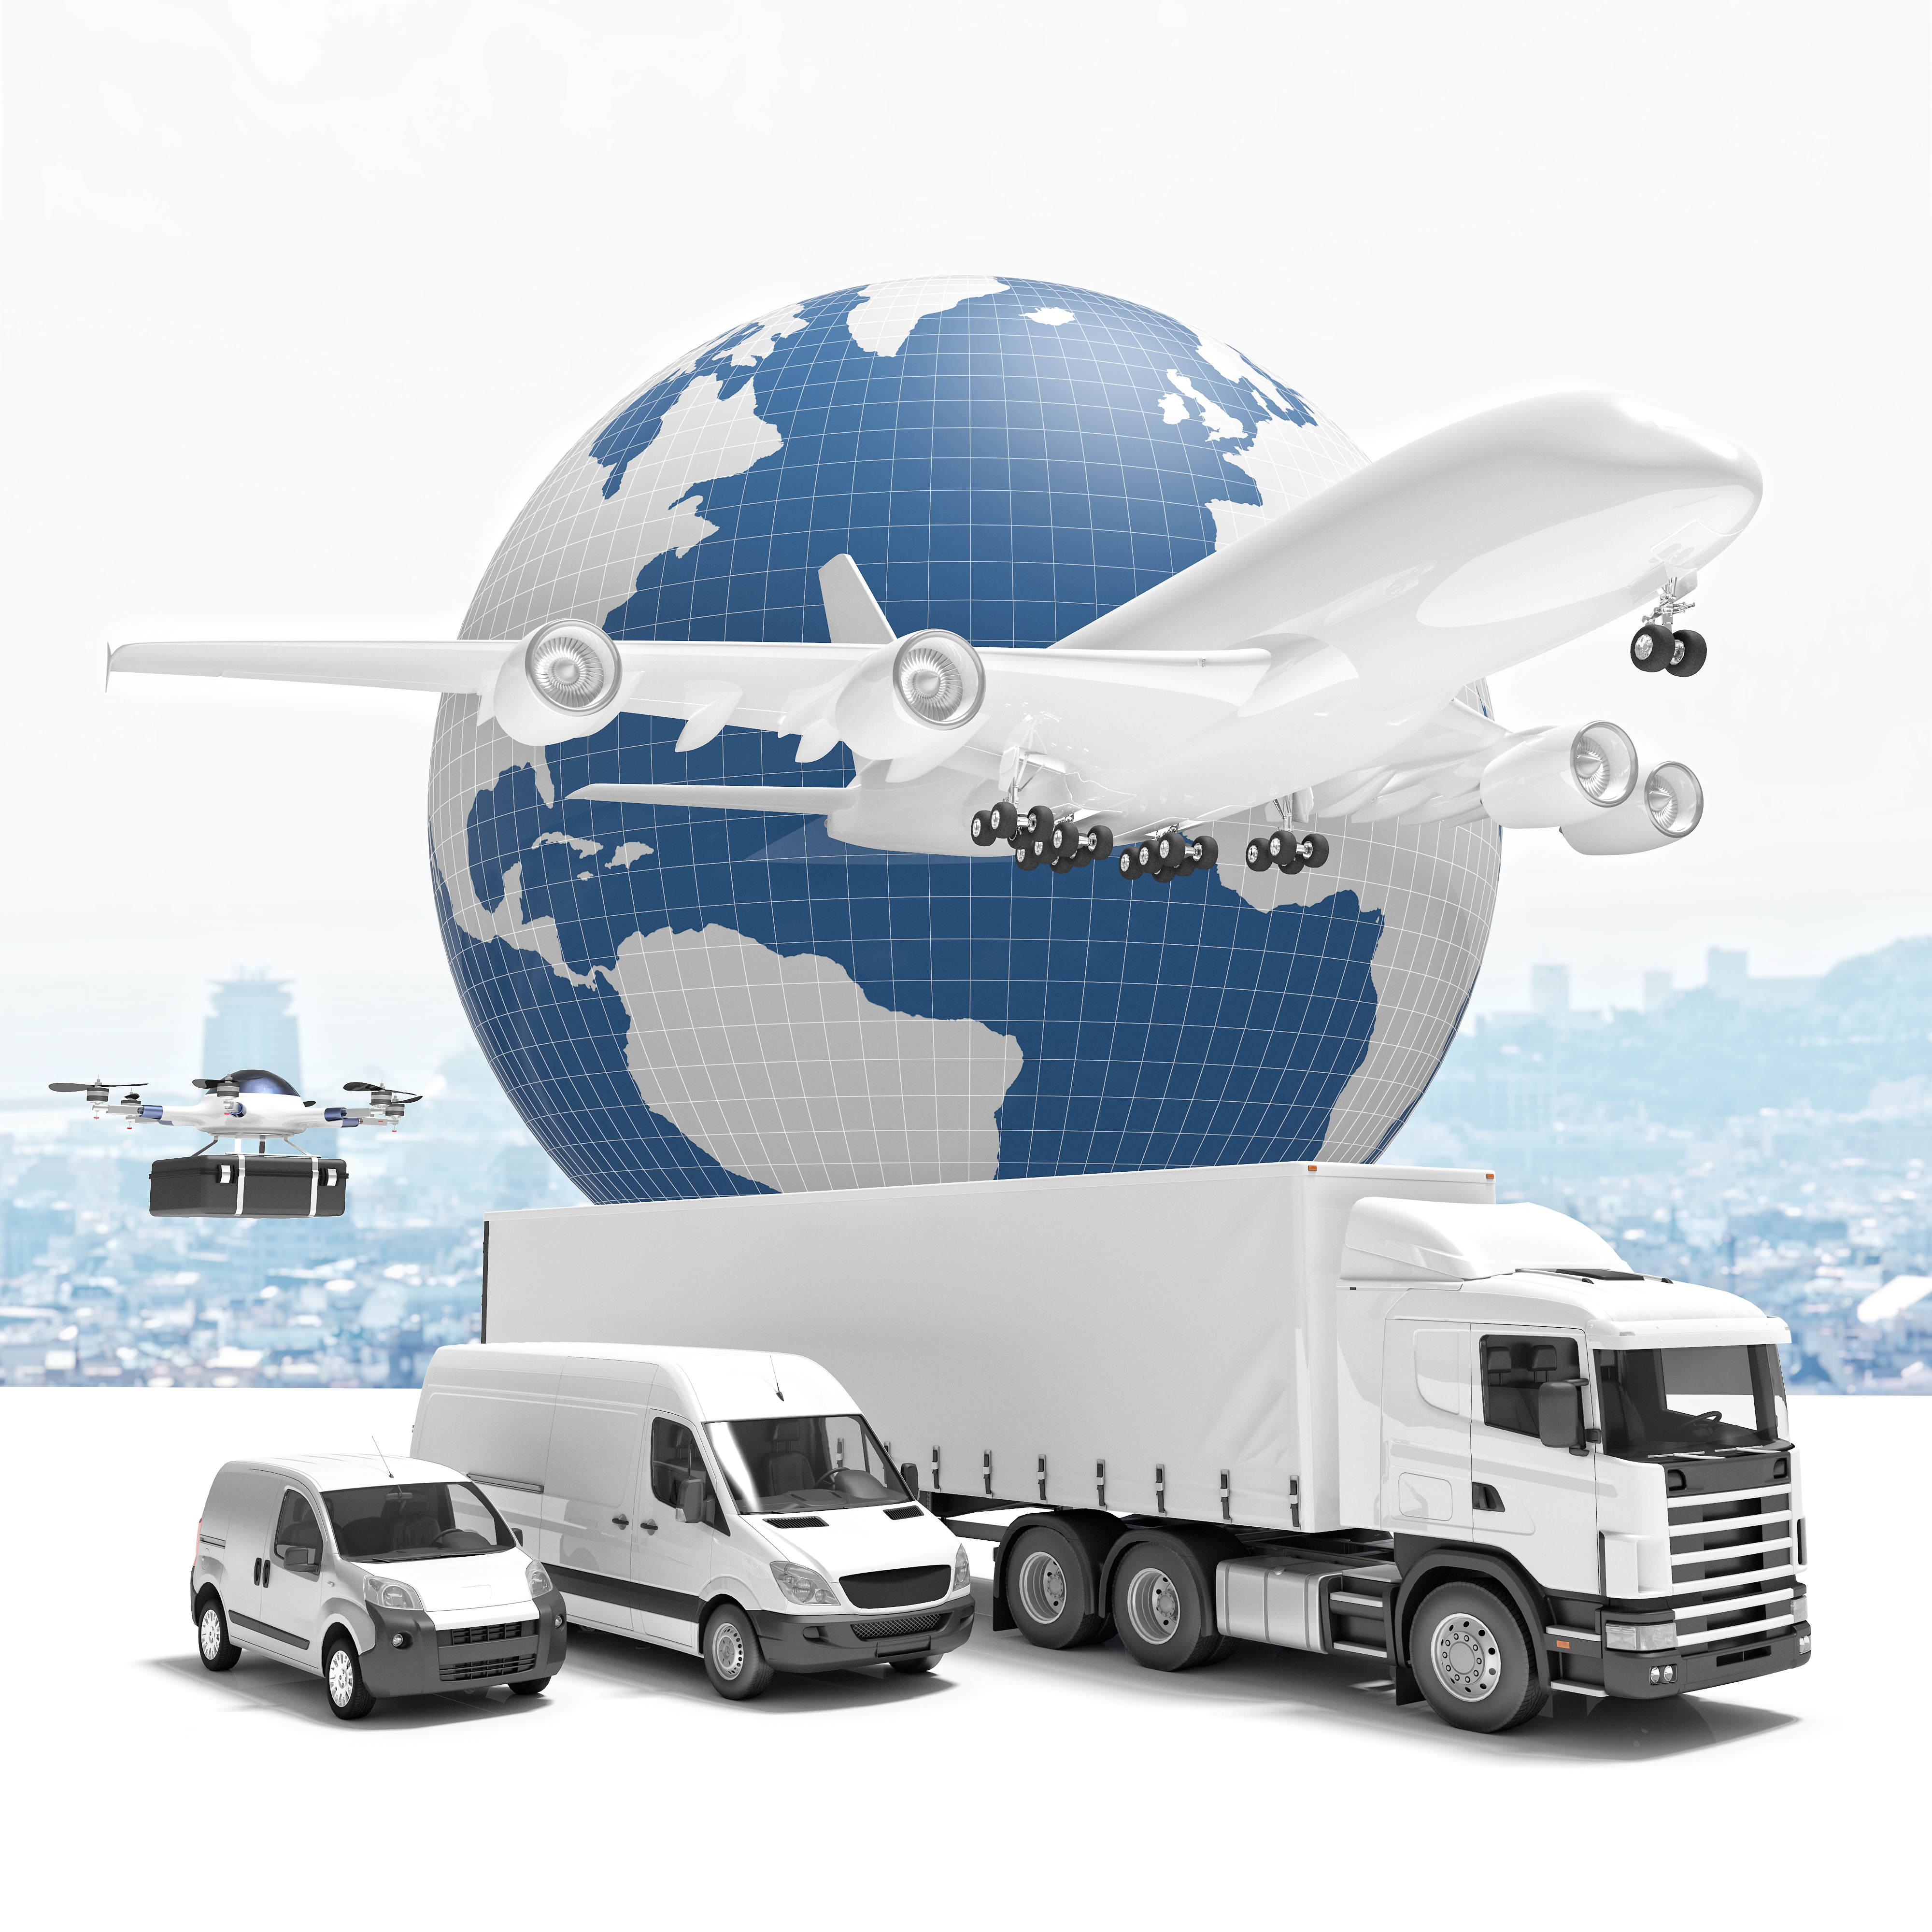 How to select a Logistics Service Provider?